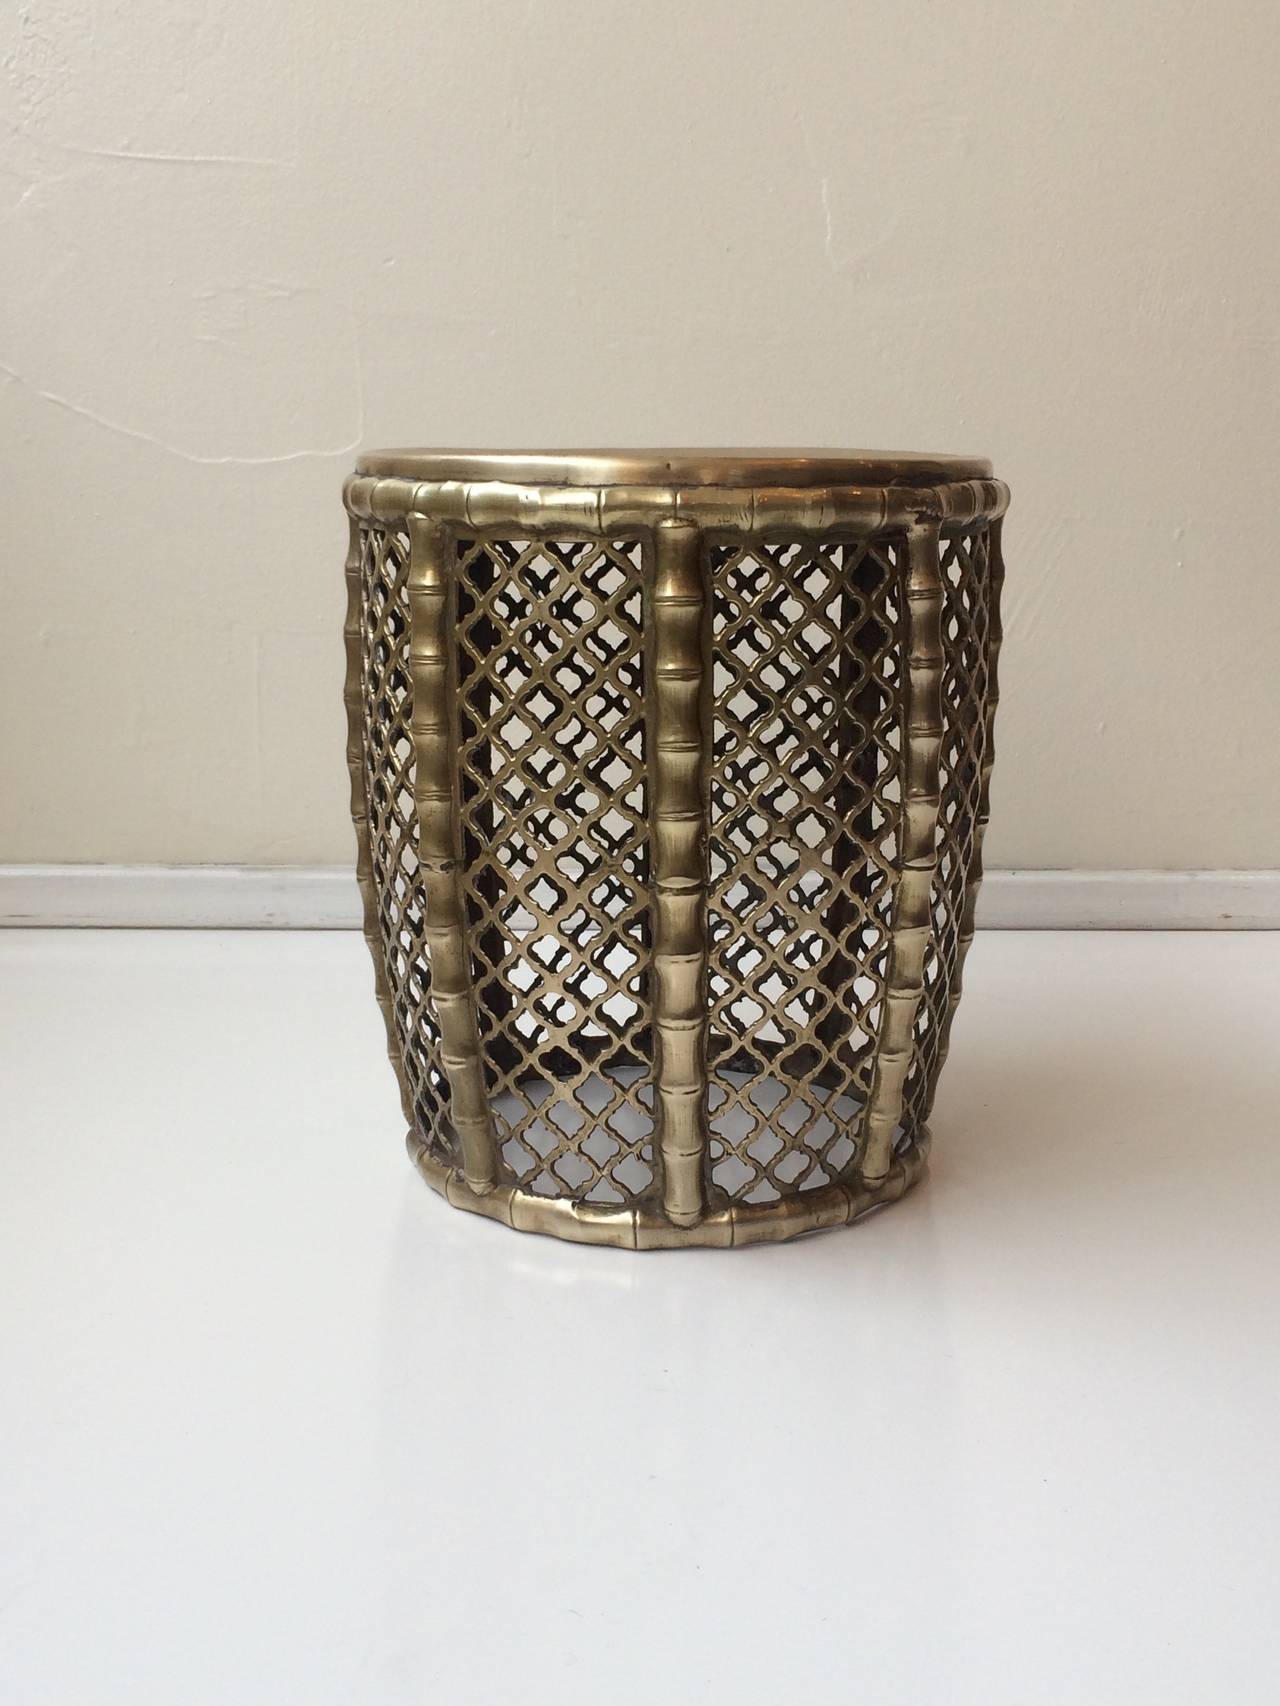 An attractive brass drum table or stool.
Made of heavy brass.
circa 1970s.